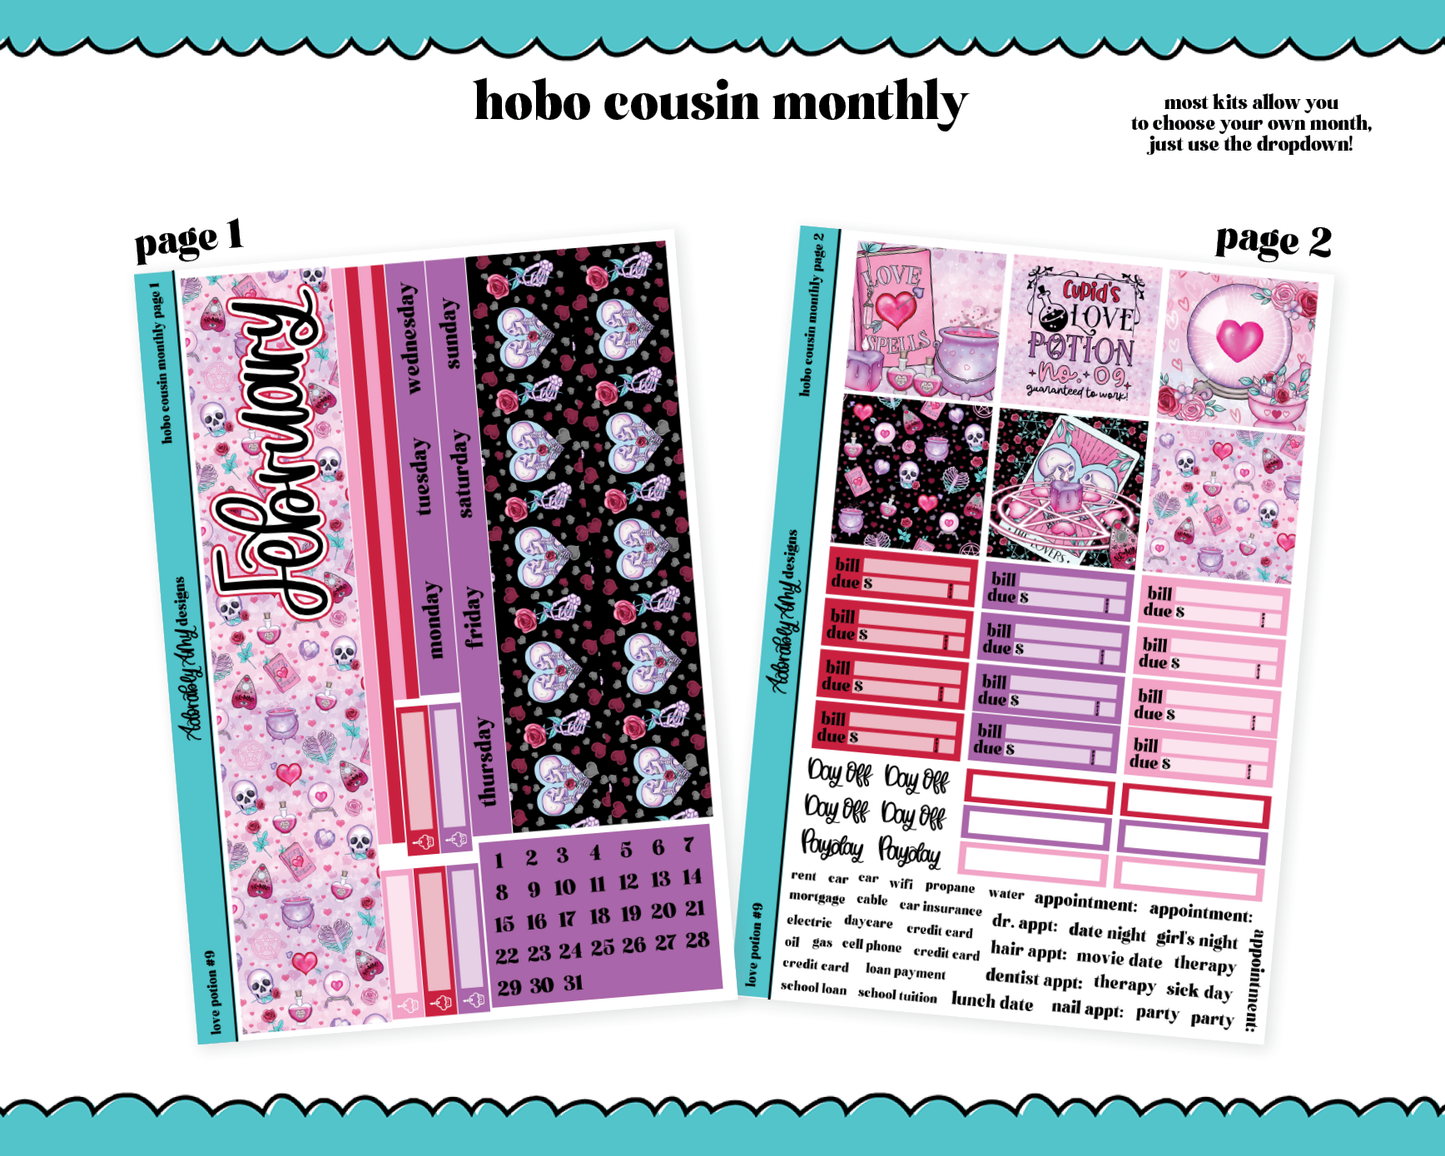 Hobonichi Cousin Monthly Pick Your Month Love Potion #9 Planner Sticker Kit for Hobo Cousin or Similar Planners